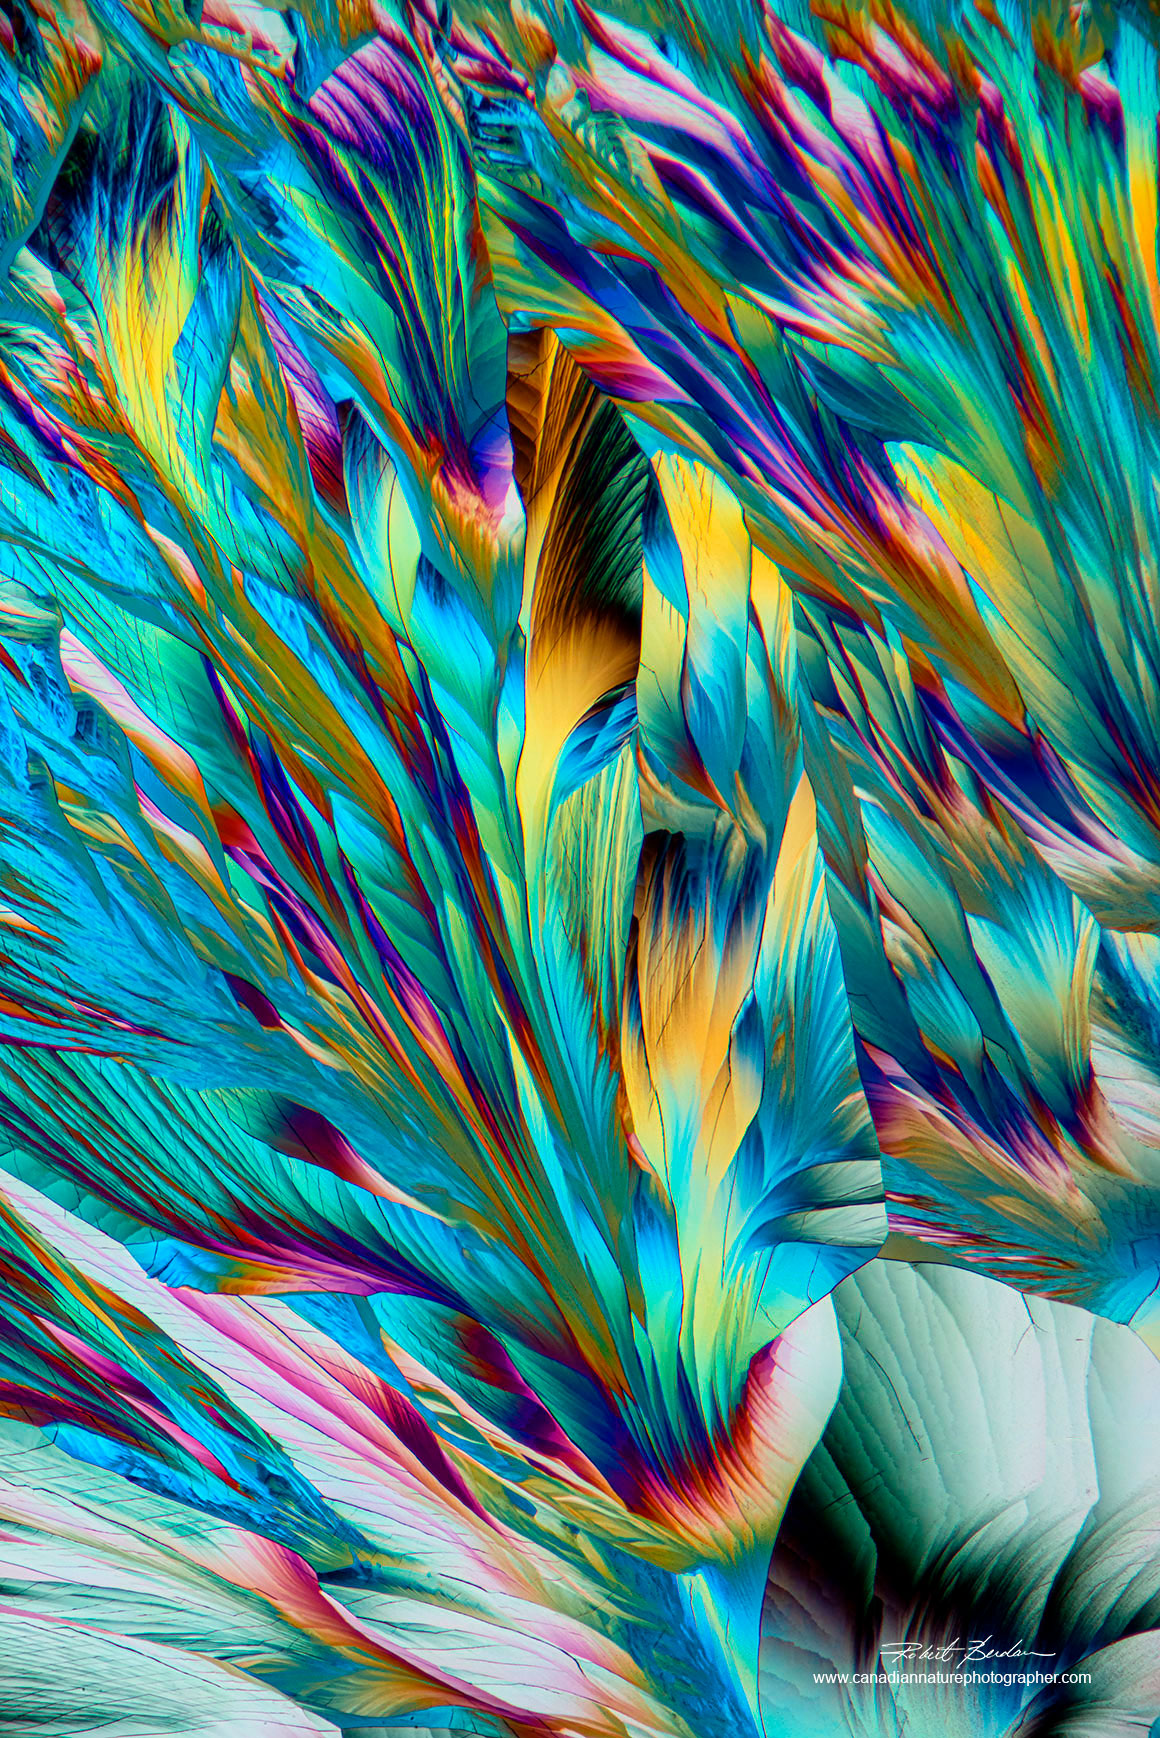 Alanine and Glutamine crystals resemble flowers when viewed with polarized light and wave plate. 40X  by R. Berdan ©